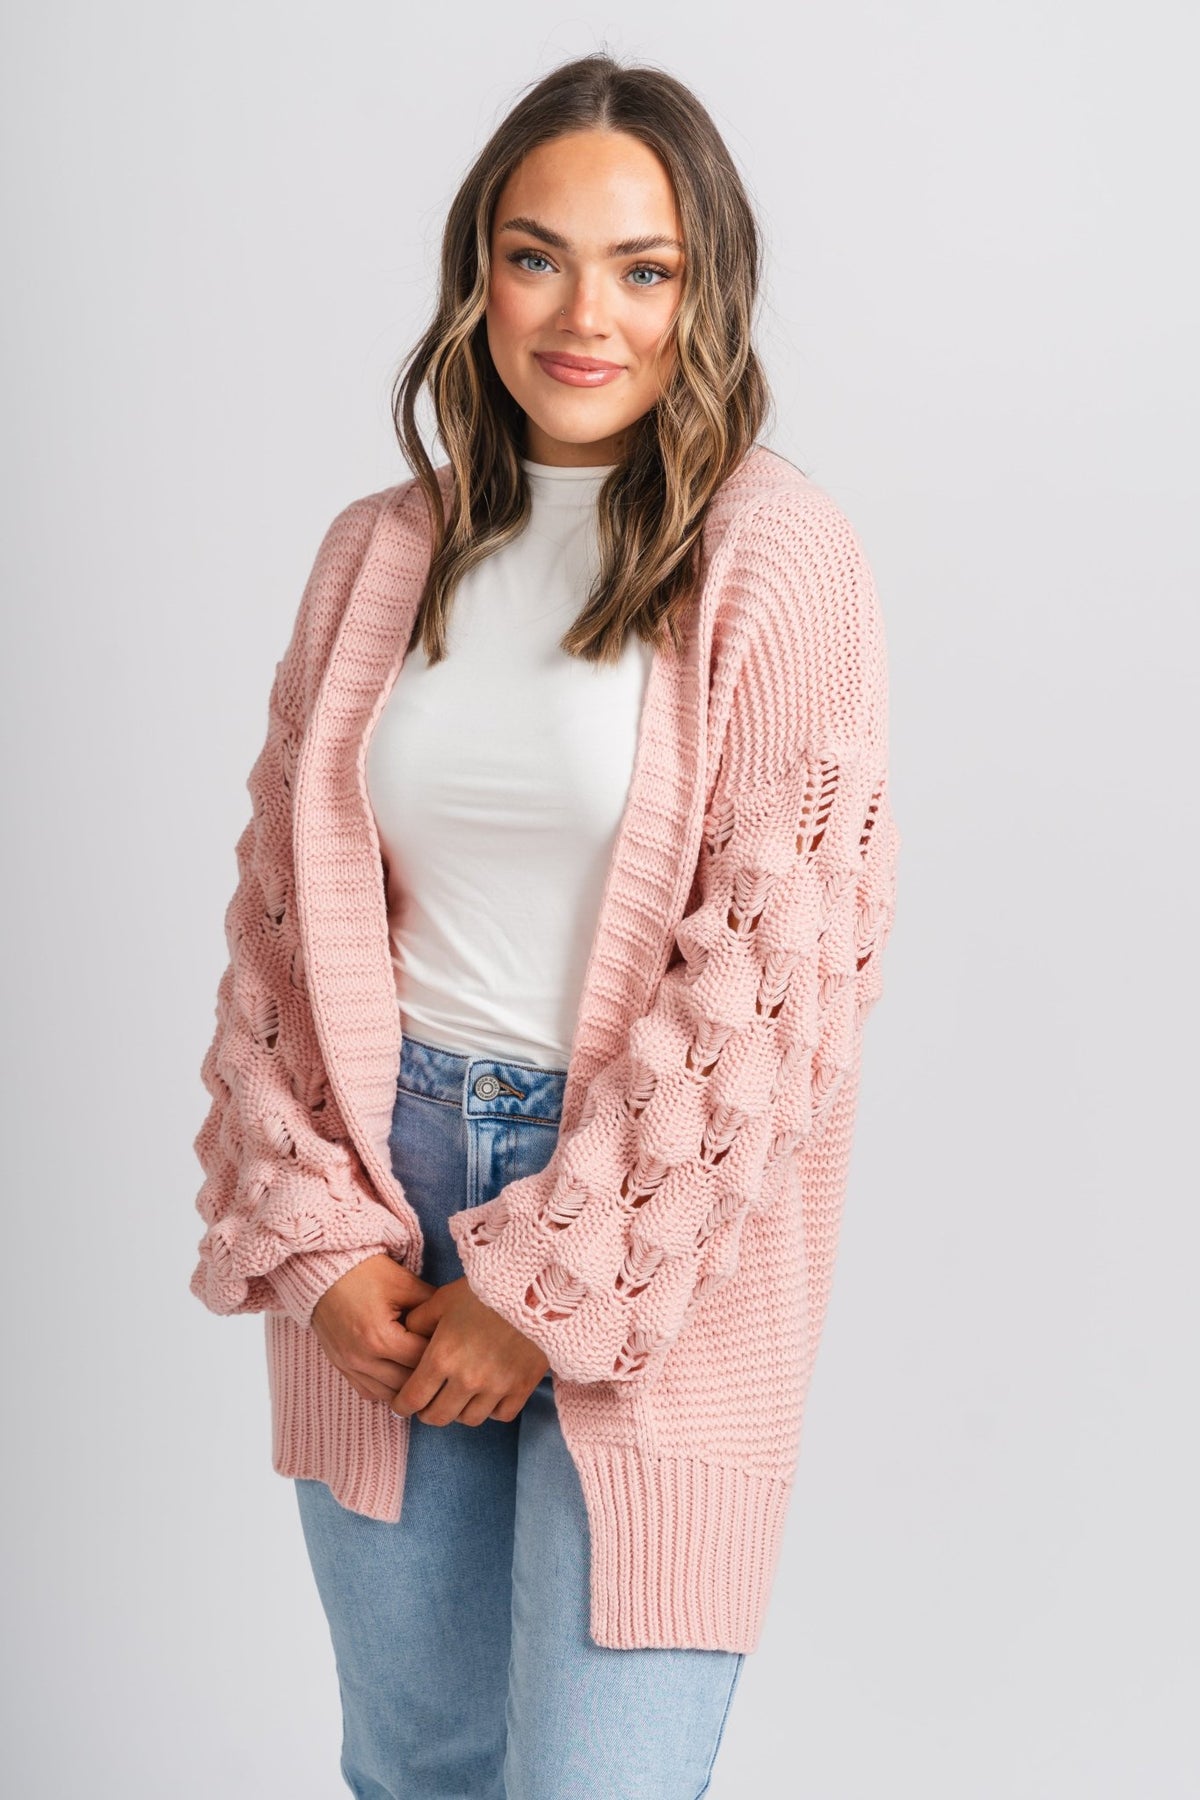 Bubble sleeve cardigan blush - Stylish Cardigan - Cute Easter Outfits at Lush Fashion Lounge Boutique in Oklahoma